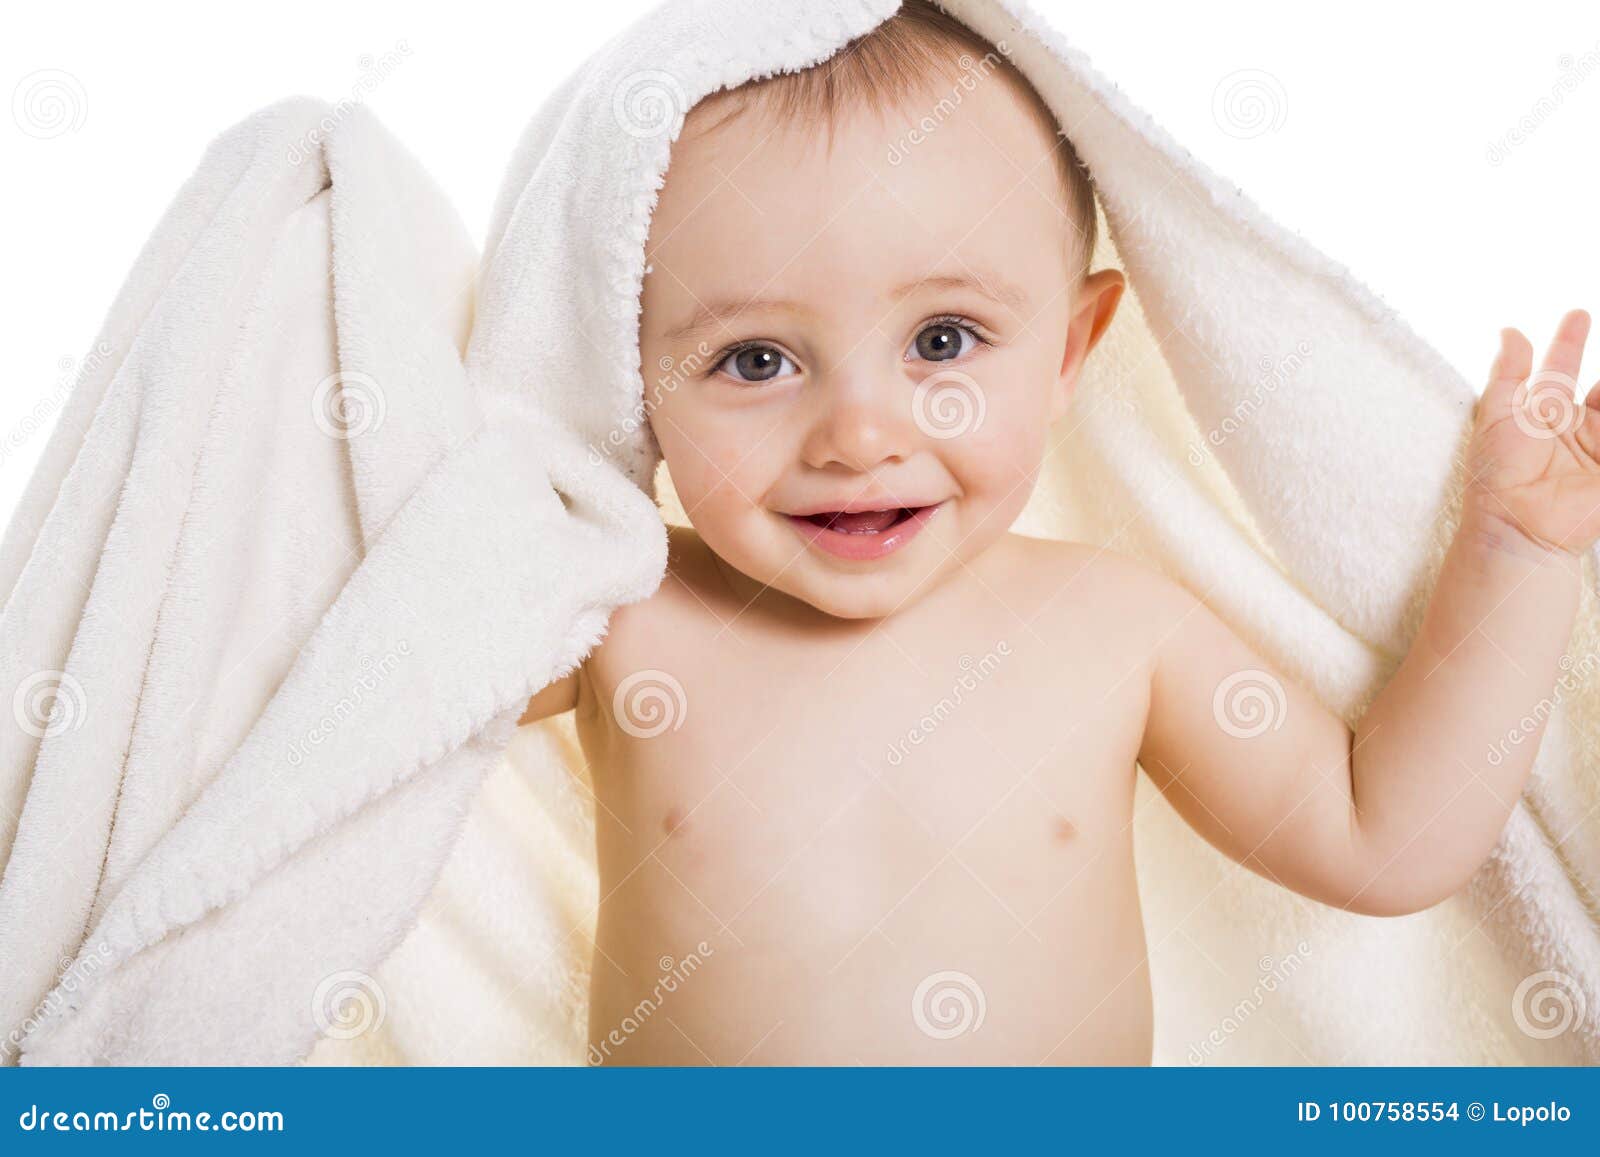 Baby Under A Towel. Isolated On A White Background Stock Photo - Image ...